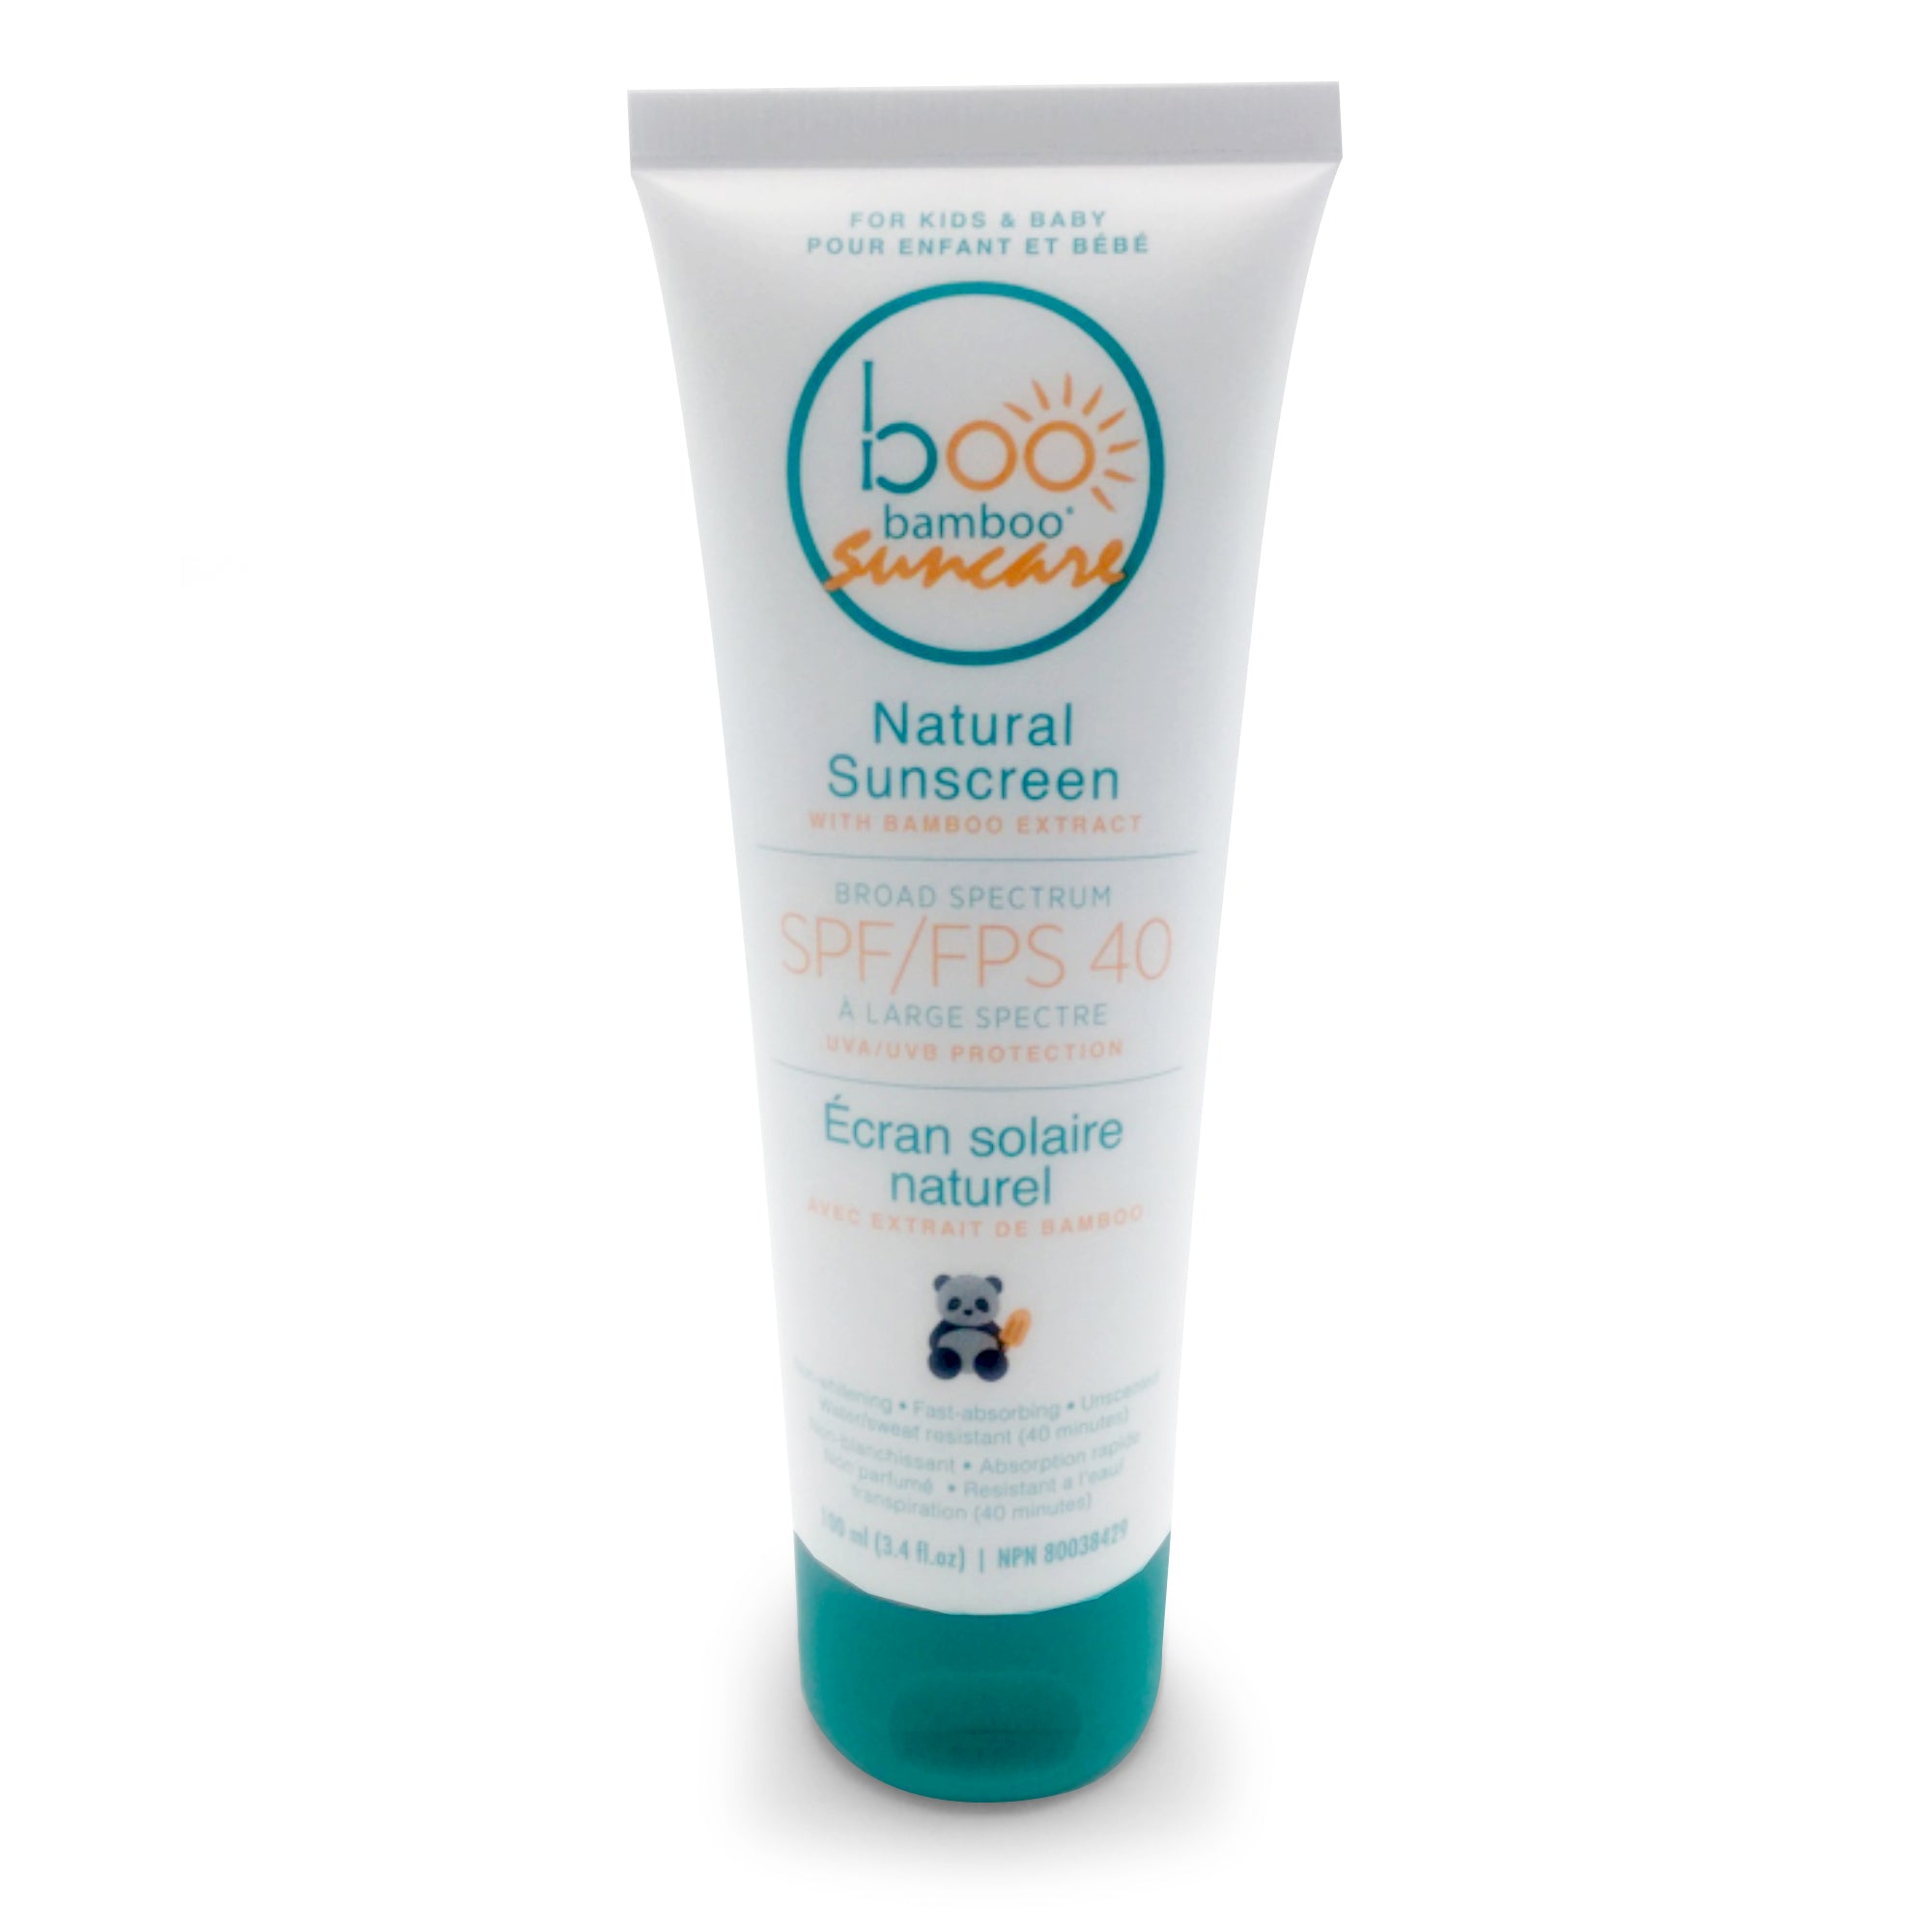 Baby Boo Bamboo Suncare Rock A Bye Baby Boutique